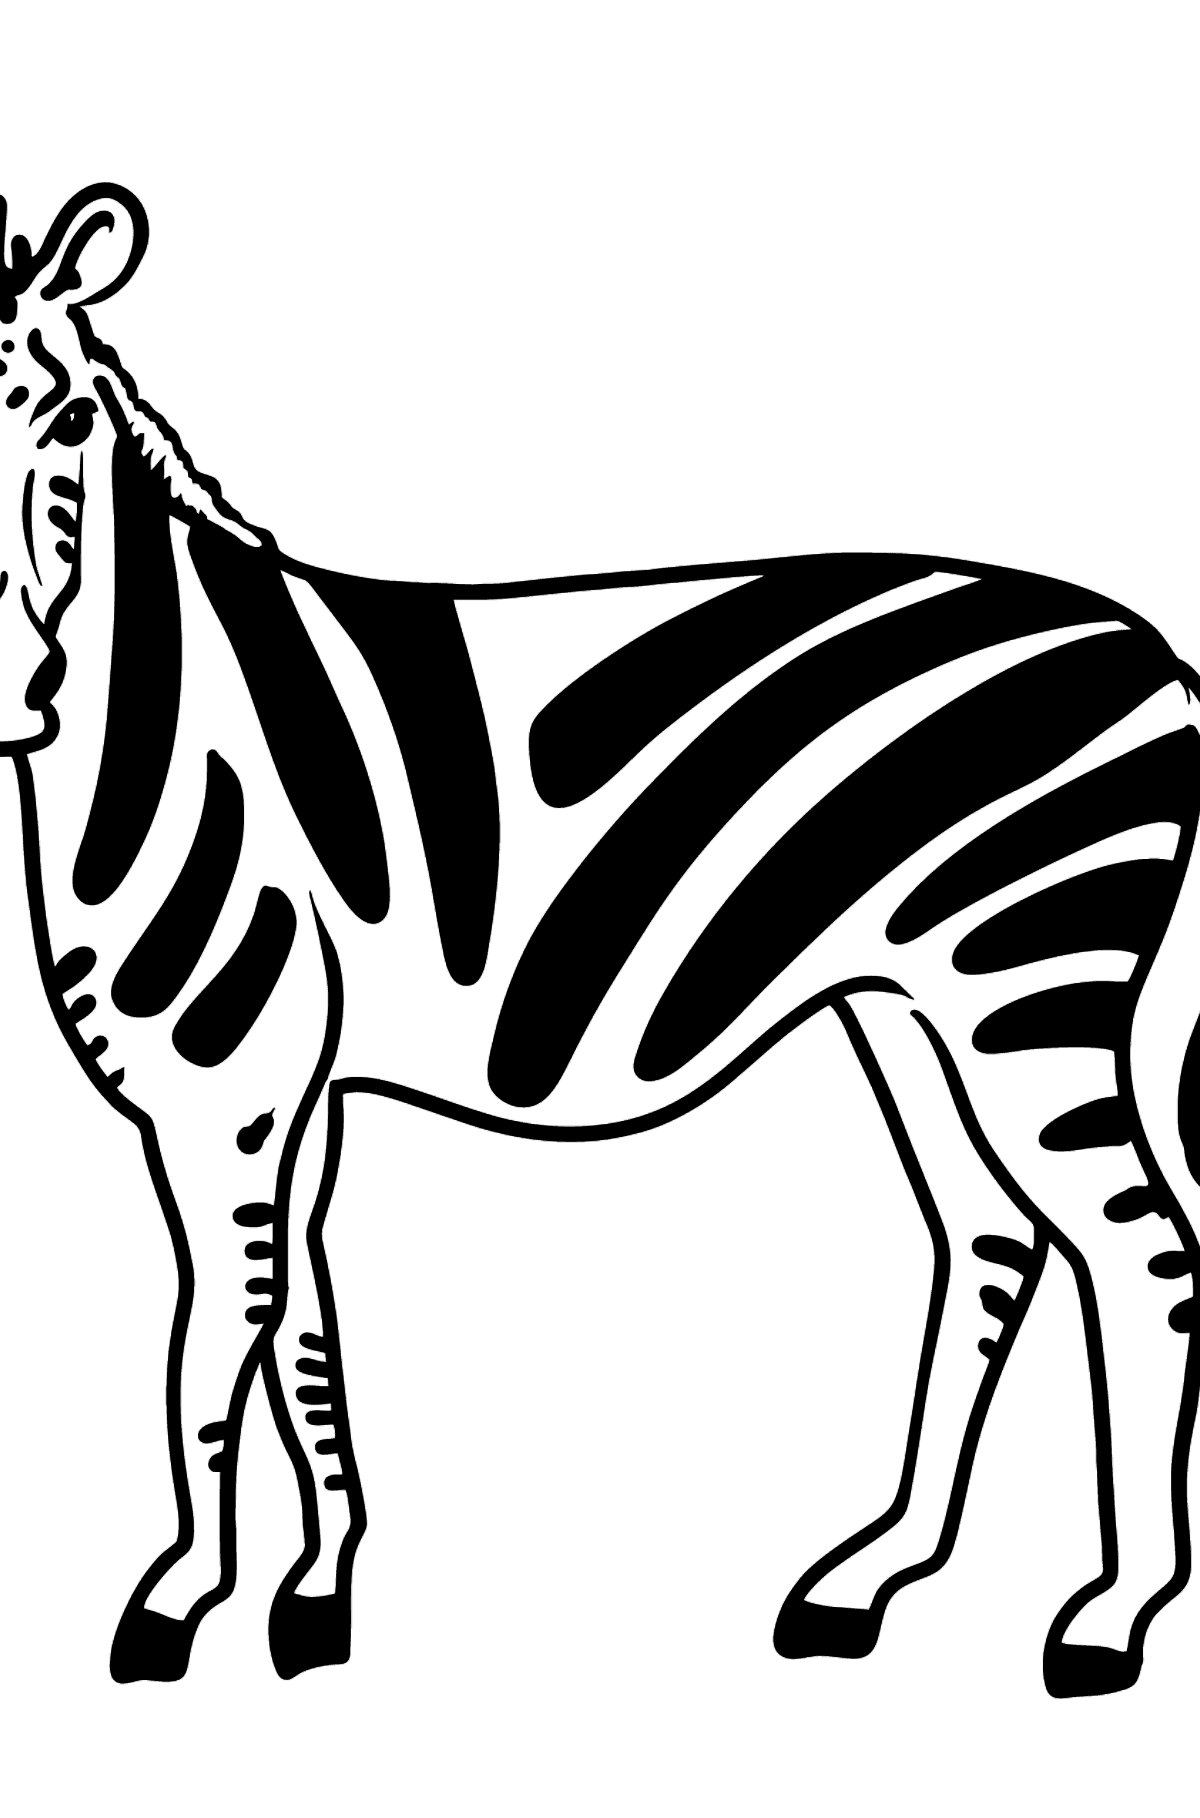 Zebra coloring page - Coloring Pages for Kids